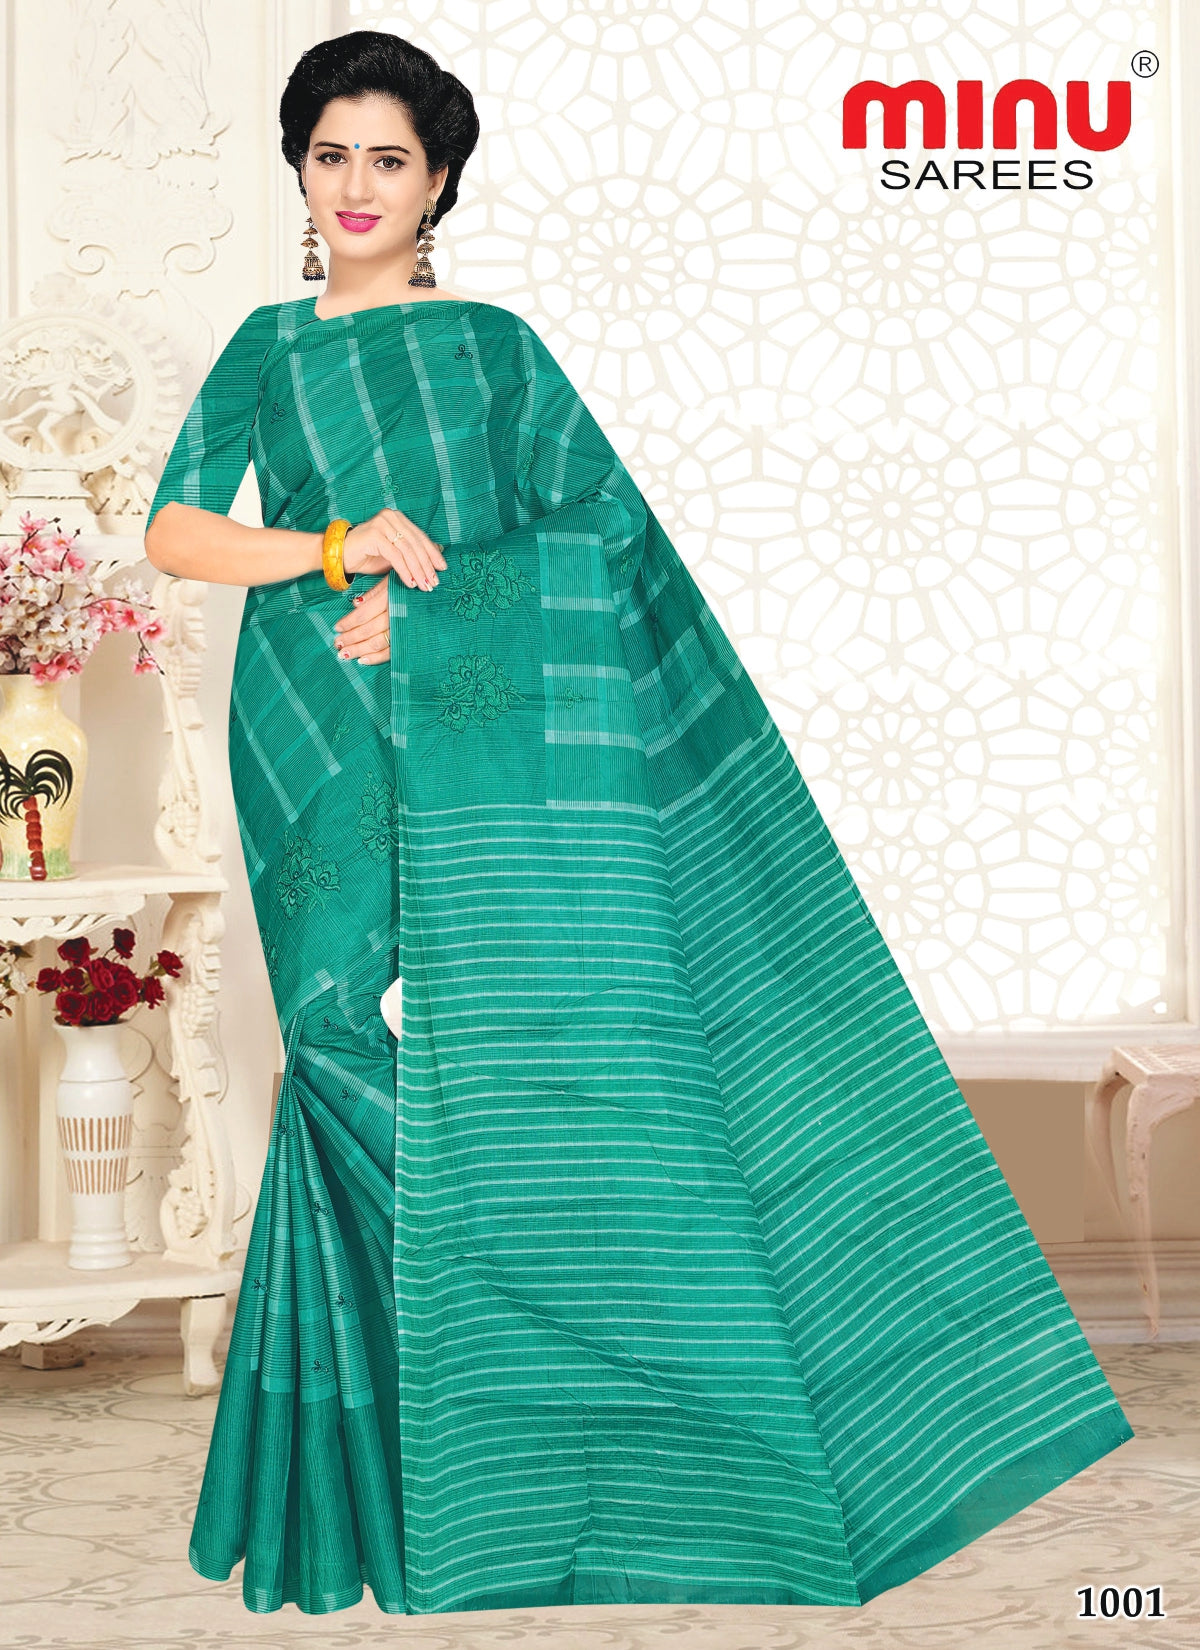 Durga puja special saree collection at low prices  in India